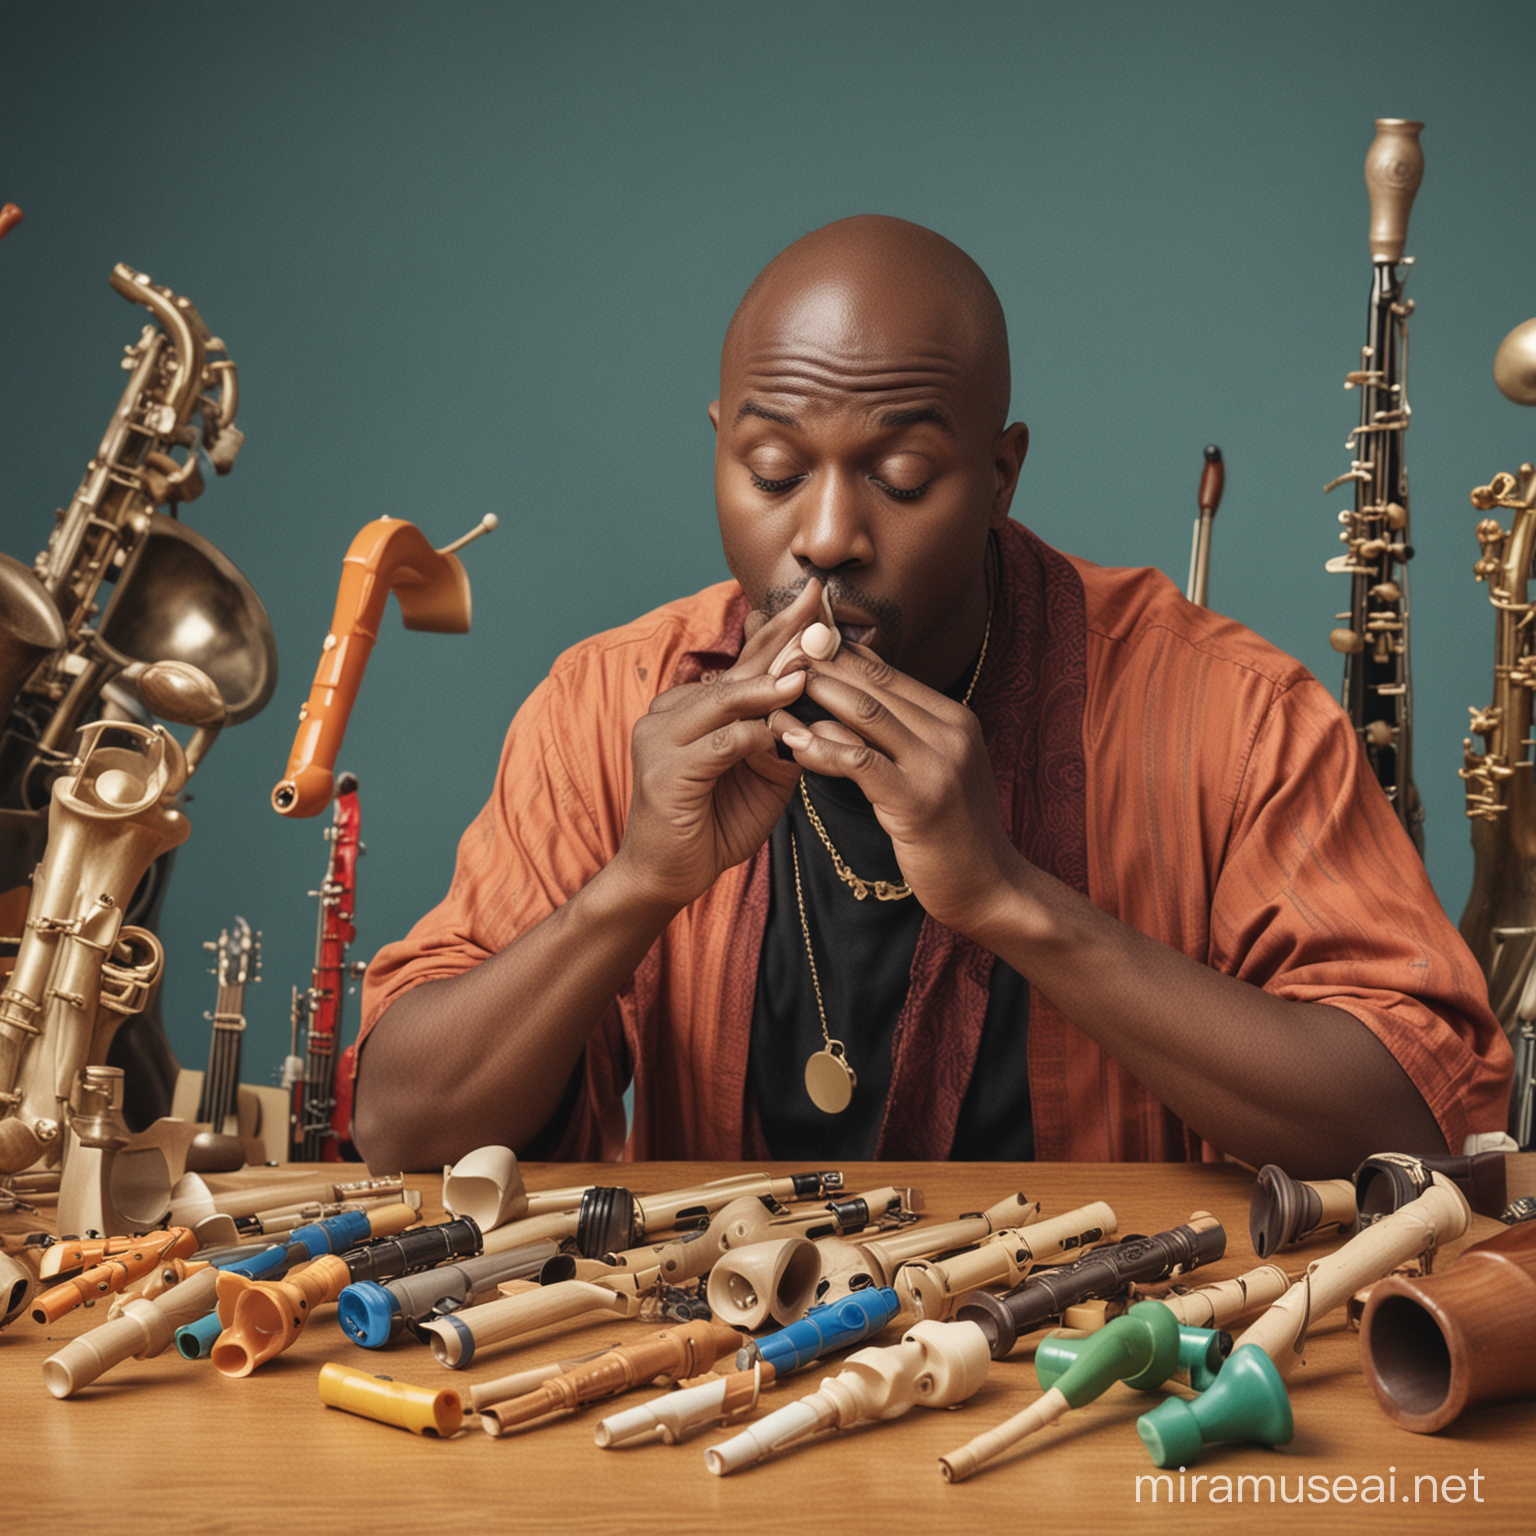 Bald Black Man Jamming with a Kazoo Amidst Musical Instruments